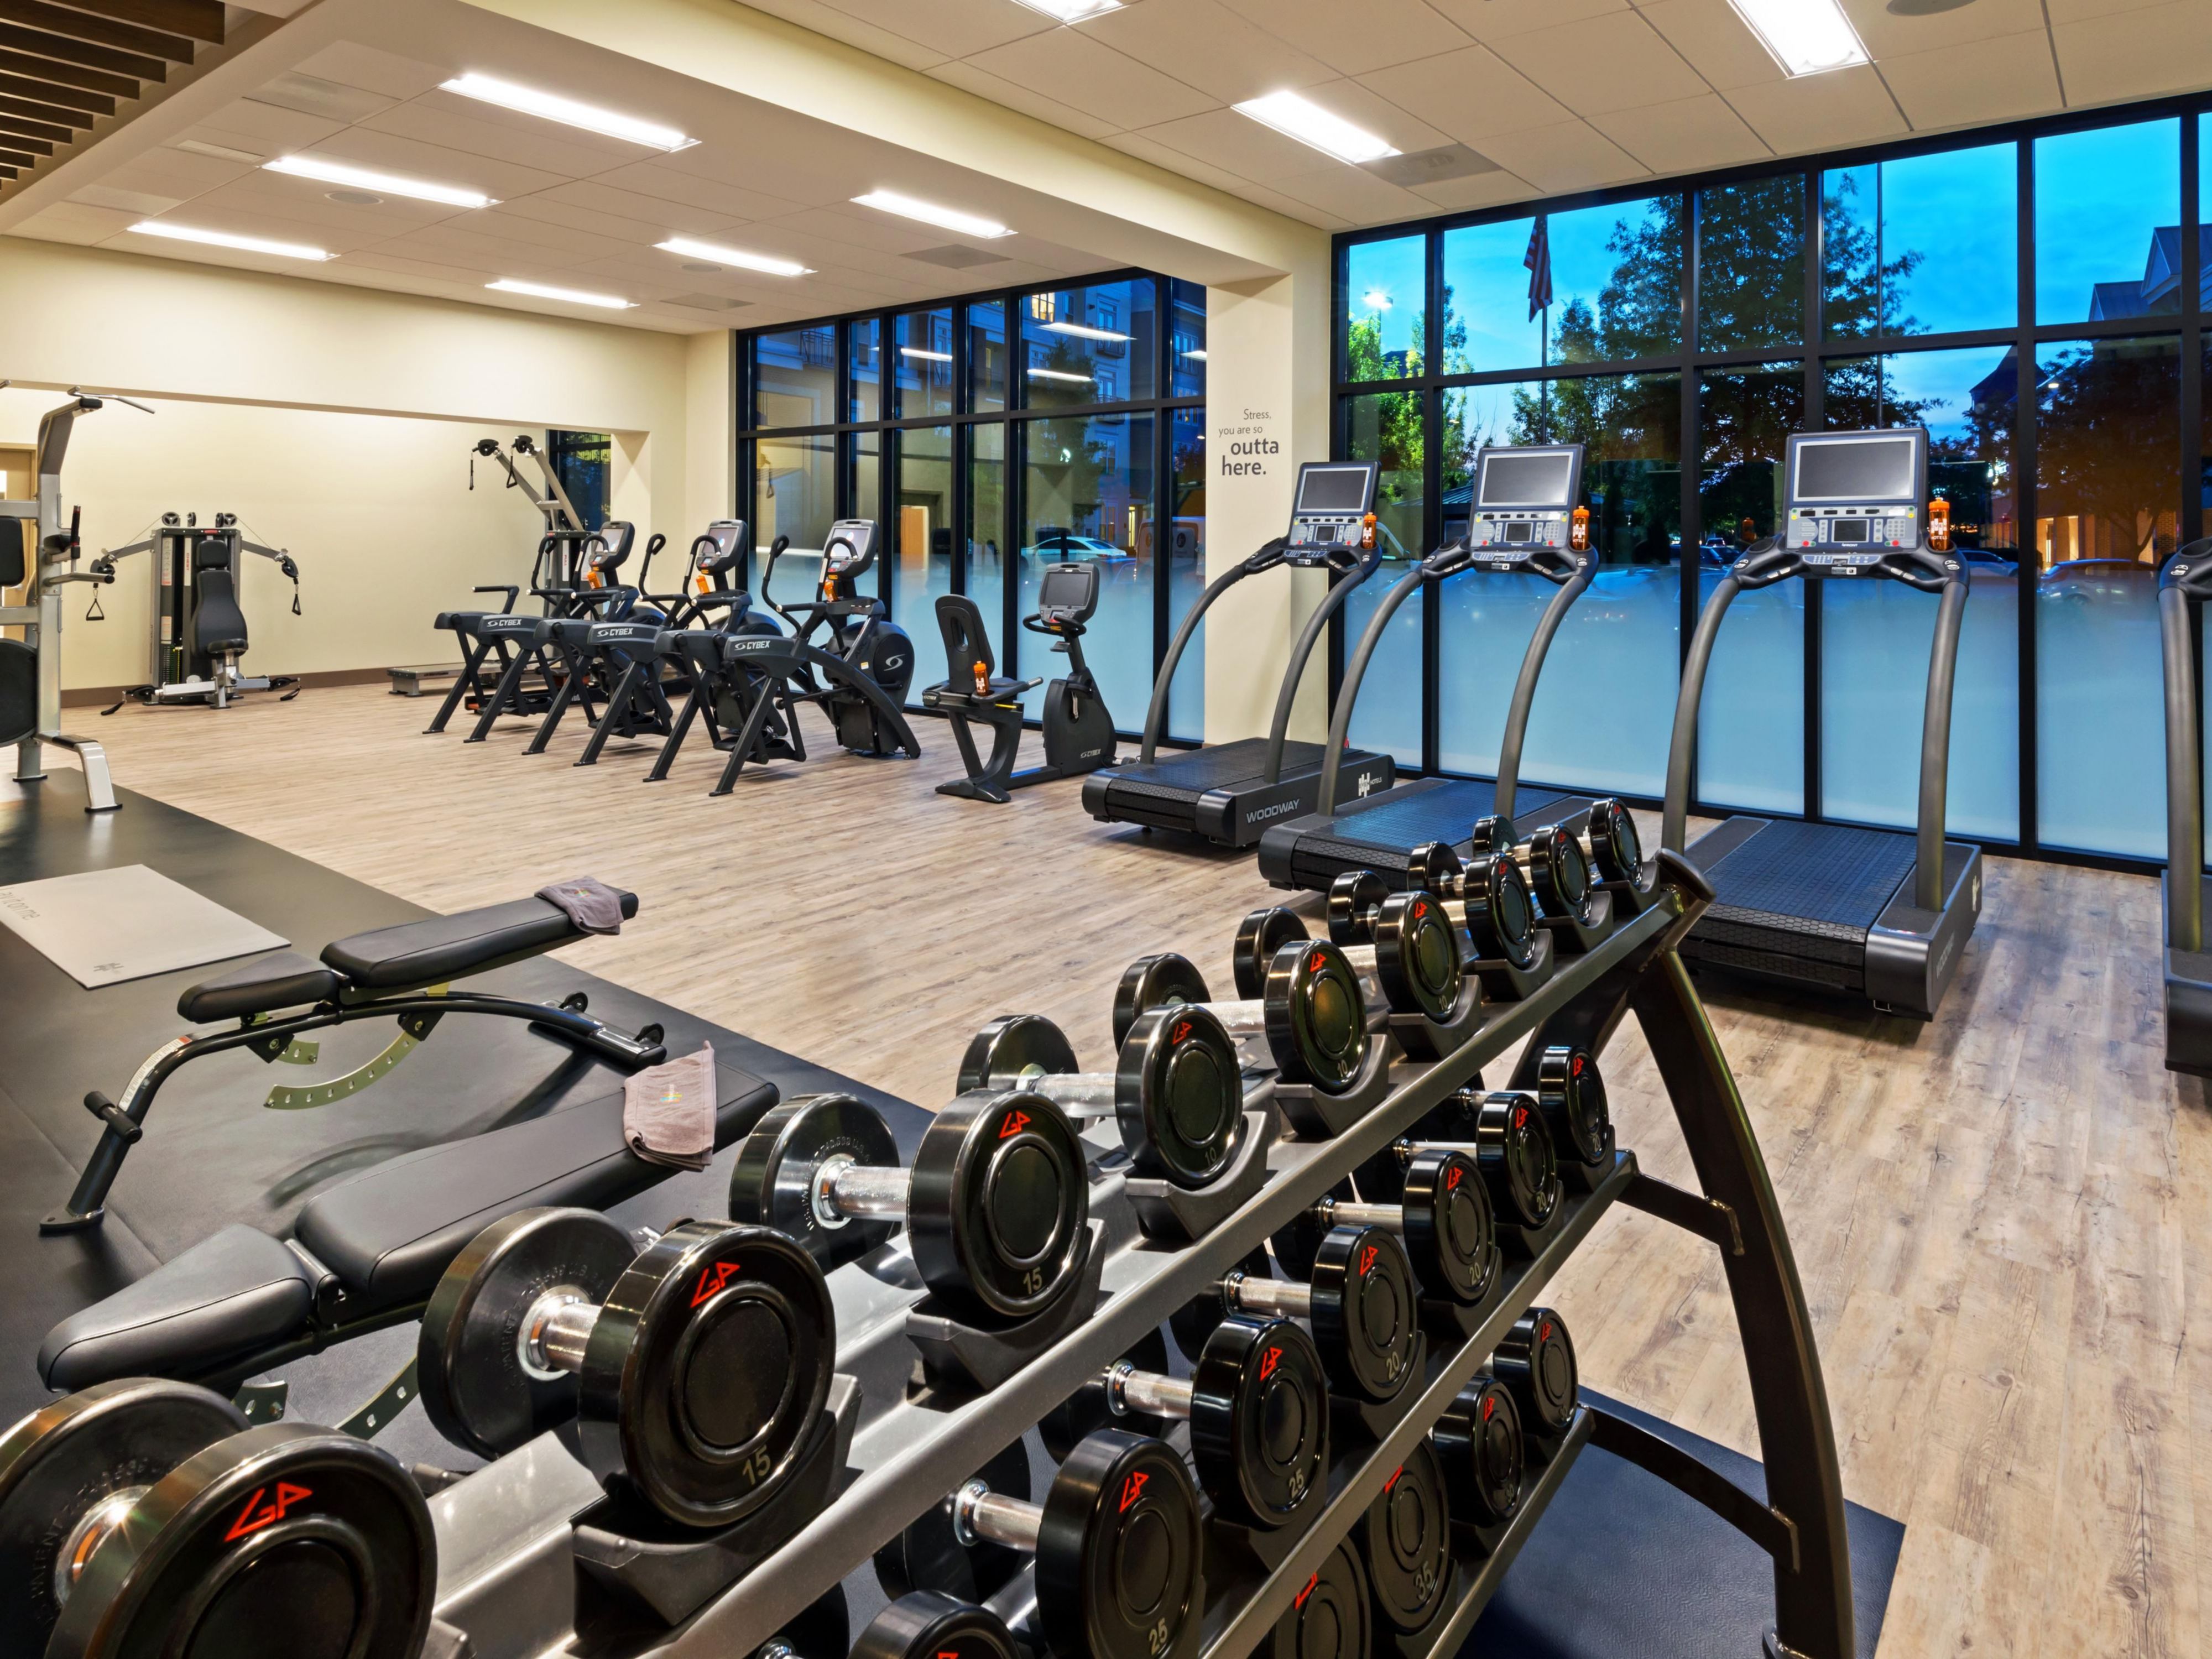 Perfect for the wellness-minded traveler, our hotel's athletic studio is the ideal location to get in full-body workouts and stick to your fitness plans. Stay active with state-of-the-art fitness equipment, Woodway treadmills, a water rower, and more. Our gym is open 24/7 so you will be able to work out when it best suits your schedule. ​